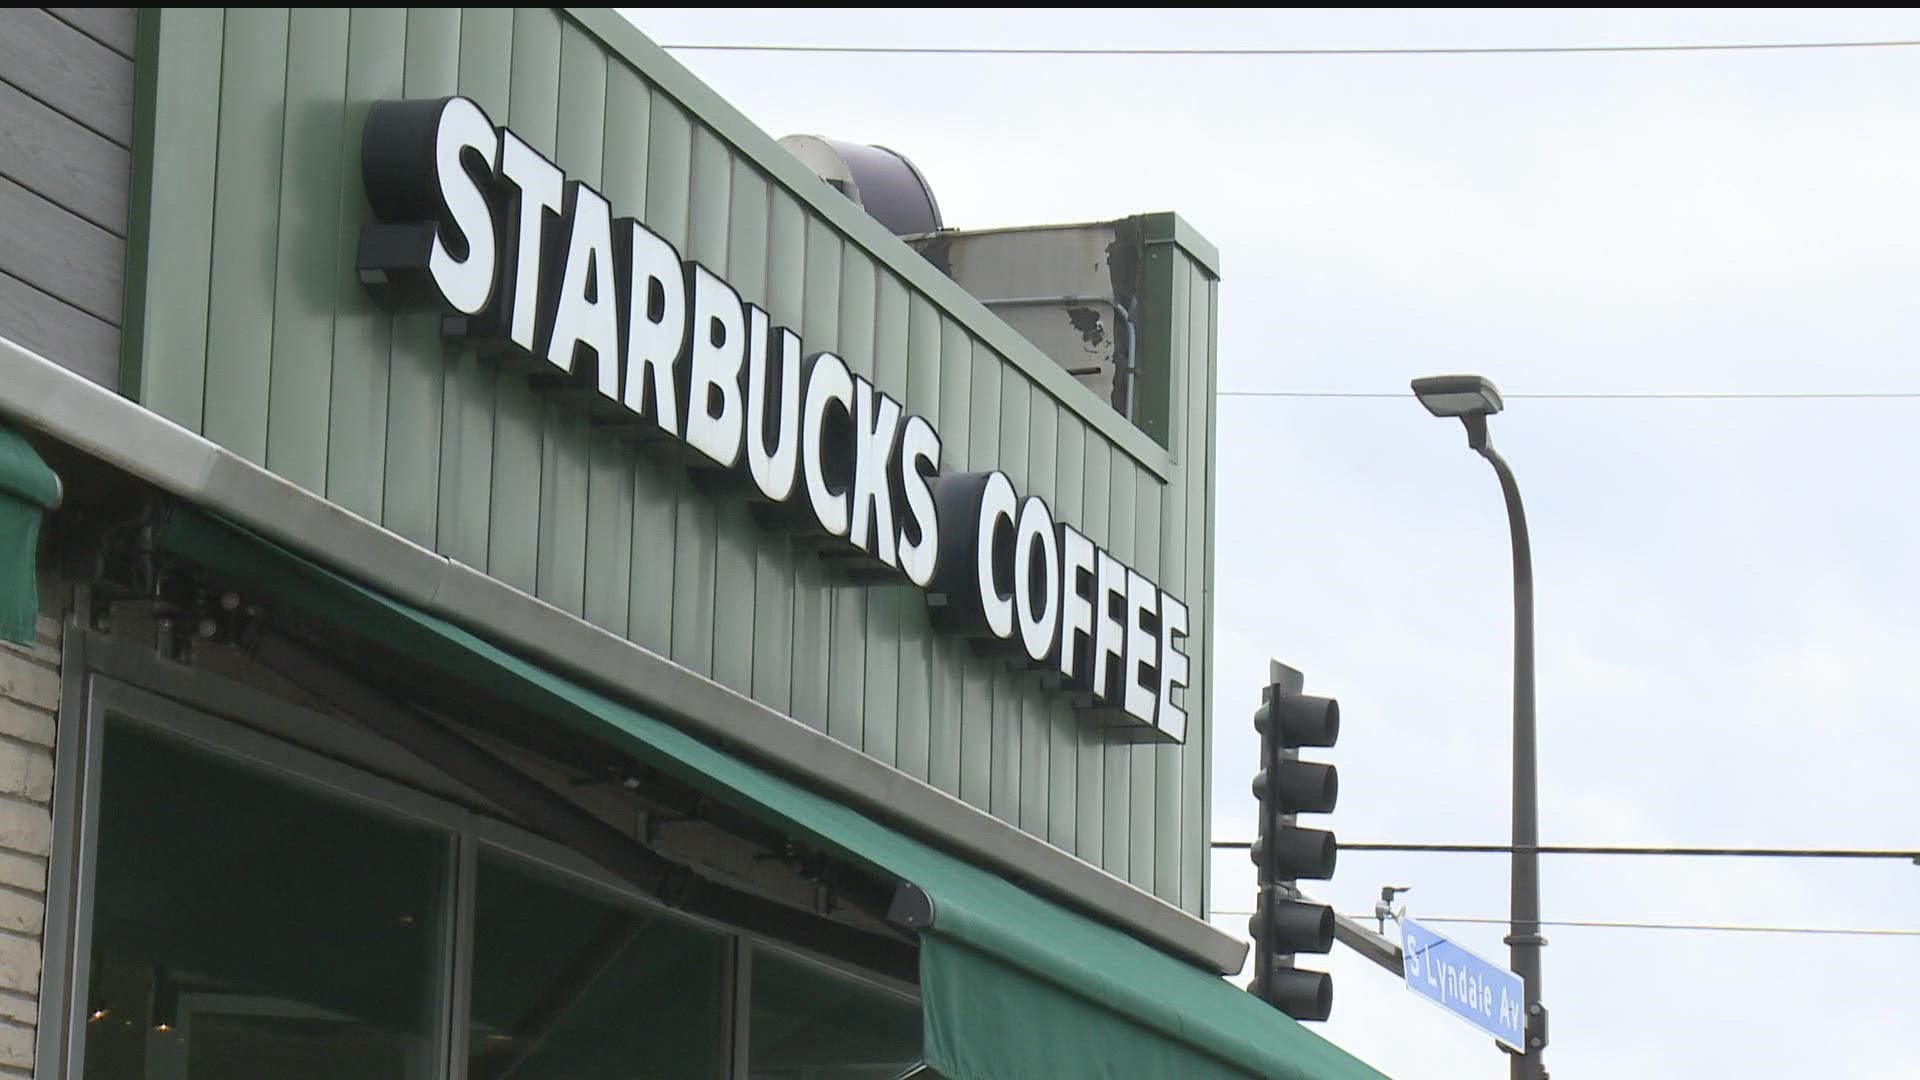 Kiya Edwards checked in with a labor expert who said the rapid flood of Starbucks stores intending to unionize is paving the way for more workers to follow suit.